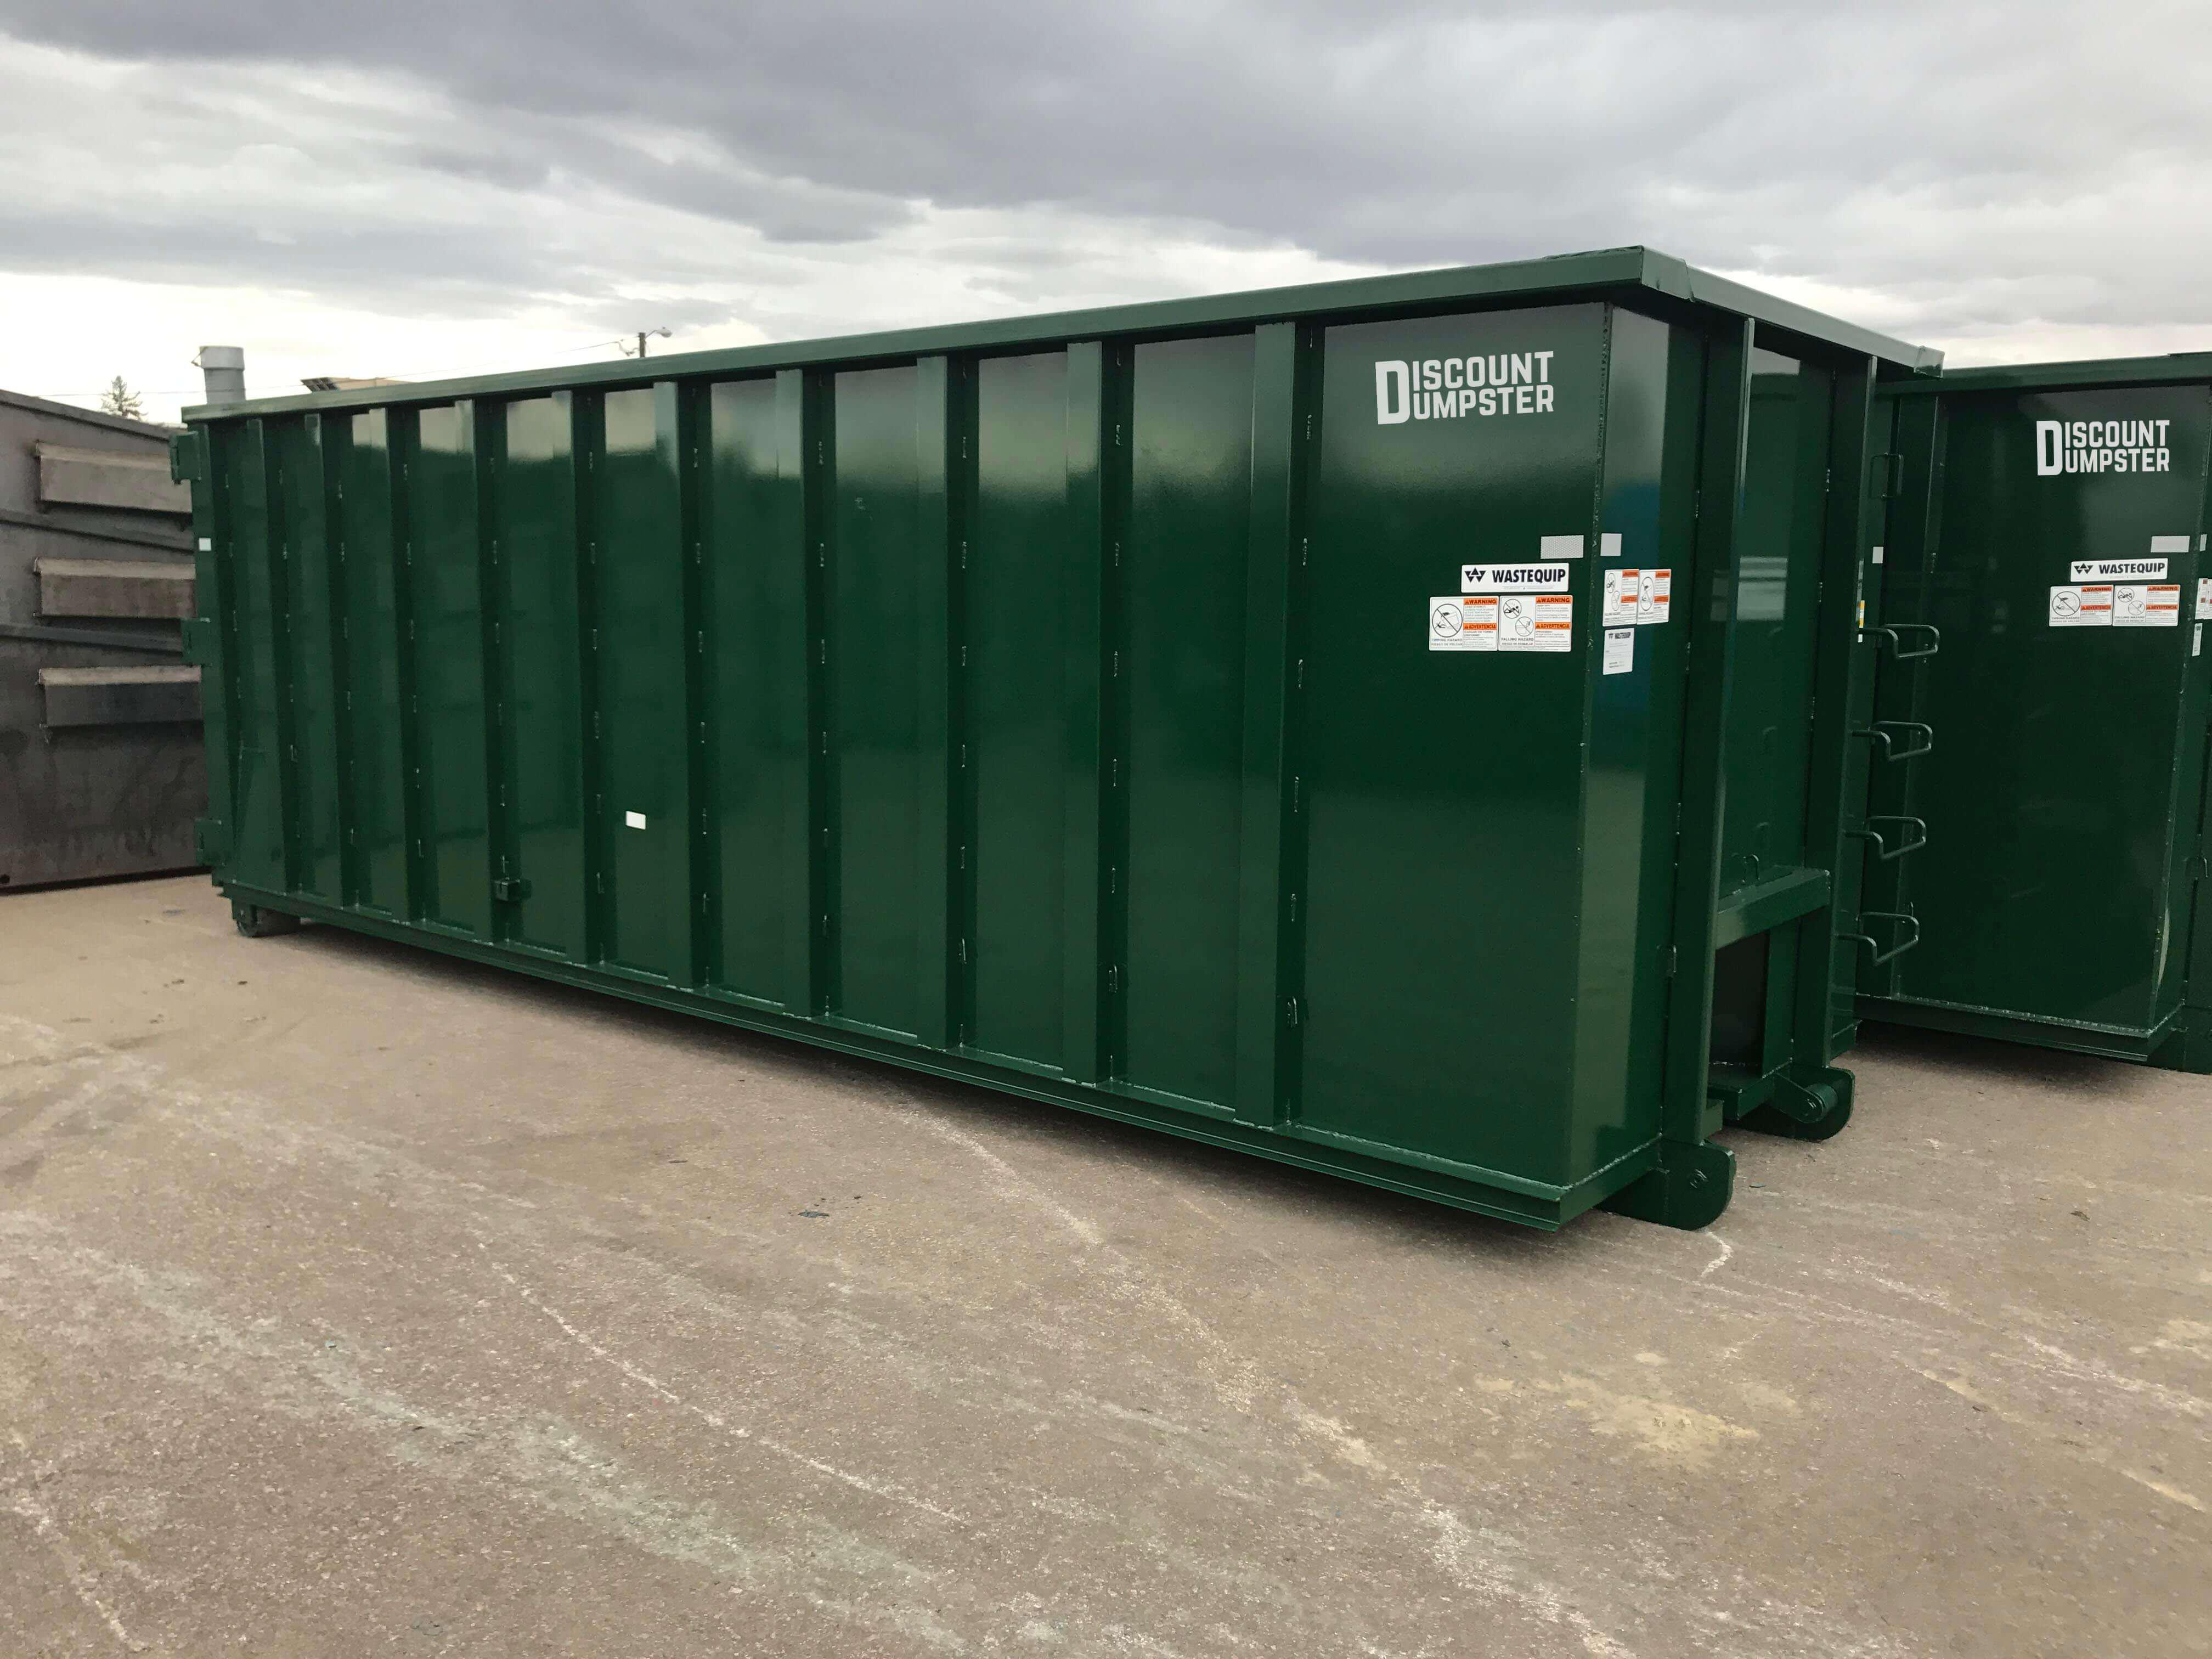 Discount dumpster in chicago il has quality roll off dumpsters so you don’t have to worry Discount Dumpster Chicago (312)549-9198